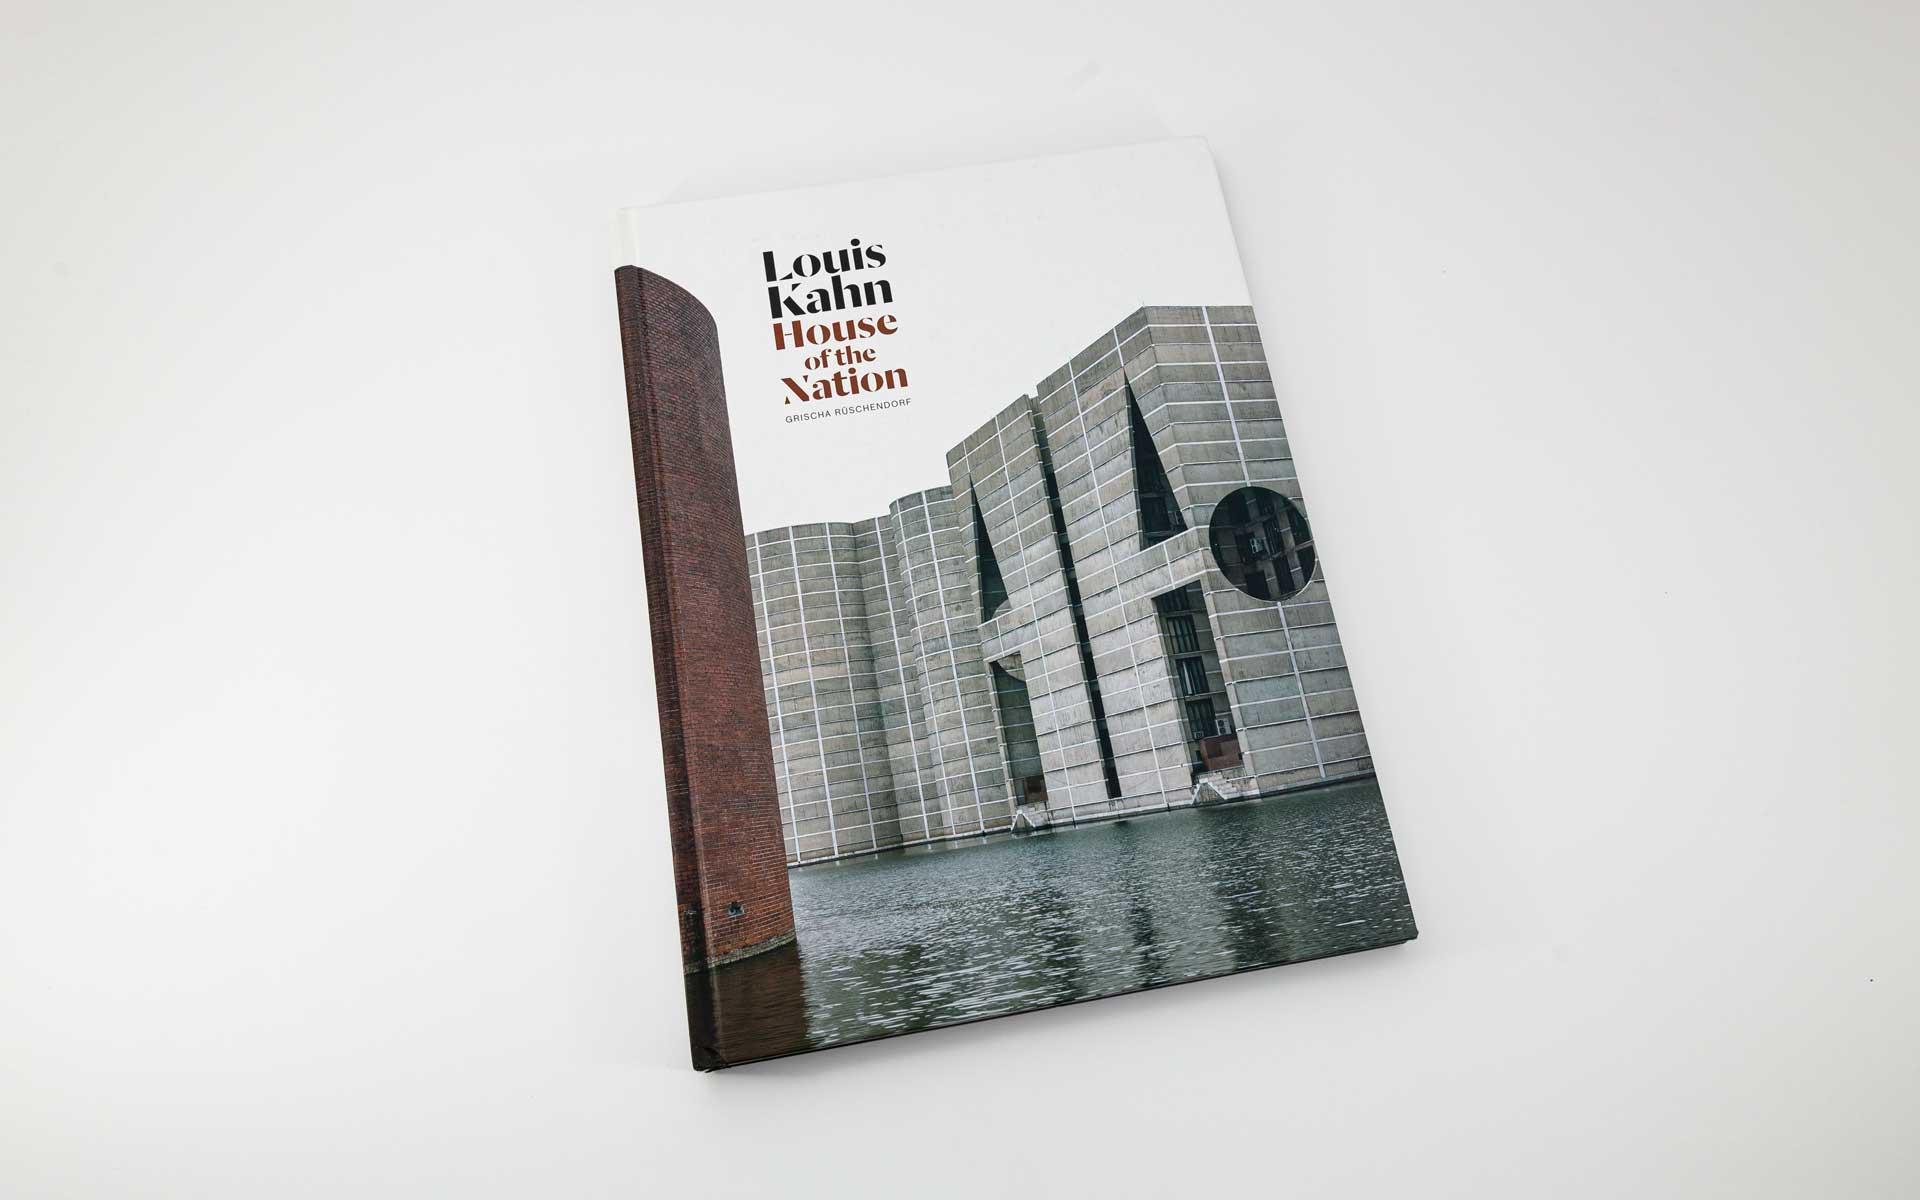 Louis Kahn - House of the Nation book cover design by Pablo Mandel